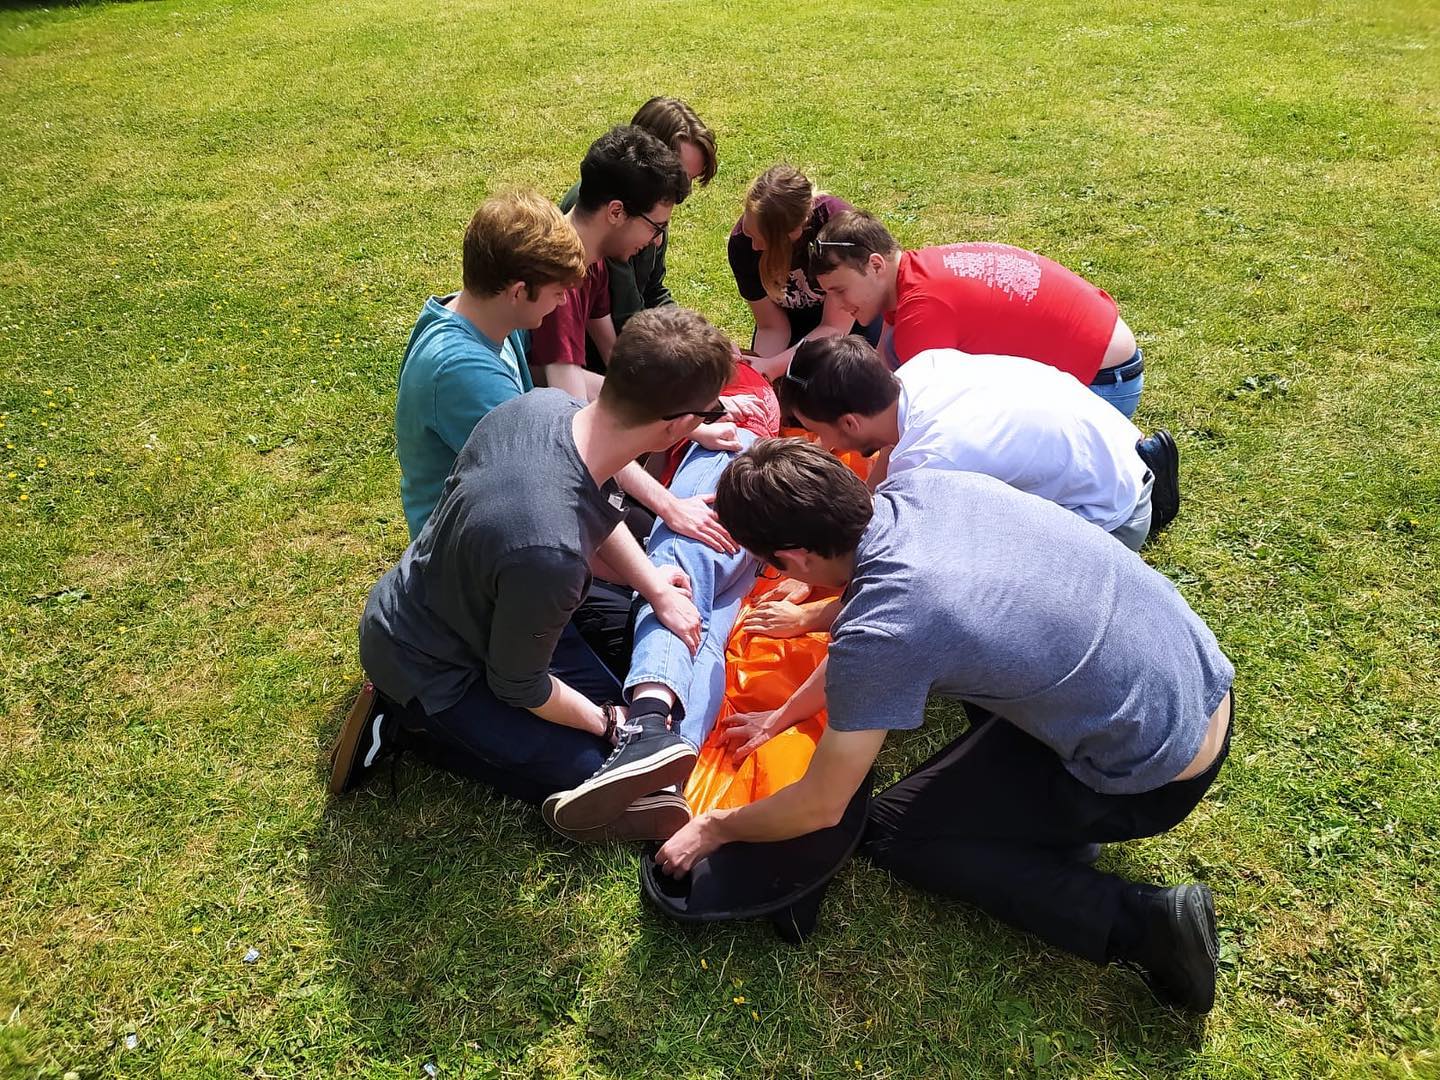 Nice to spend a lot of time dealing with sunburn and dehydration on an Outdoor First Aid (16hr) course in Warwick this week. We have dates available monthly, on our course suitable for outdoor instructors, adventurers, and YOU! No experience necessary. https://www.wilderness-development.com/first-aid/outdoor-first-aid
.
.
.
#wildernessdevelopment #outdoorfirstaid #firstaid #course #emergencyfirstaid #cpd  #cpr #training #cprtraining #safety #medical #aed #firstaidtraining #emergency #survival #health #stopthebleed #firstresponder #savealife  #survivalskills #firstresponse